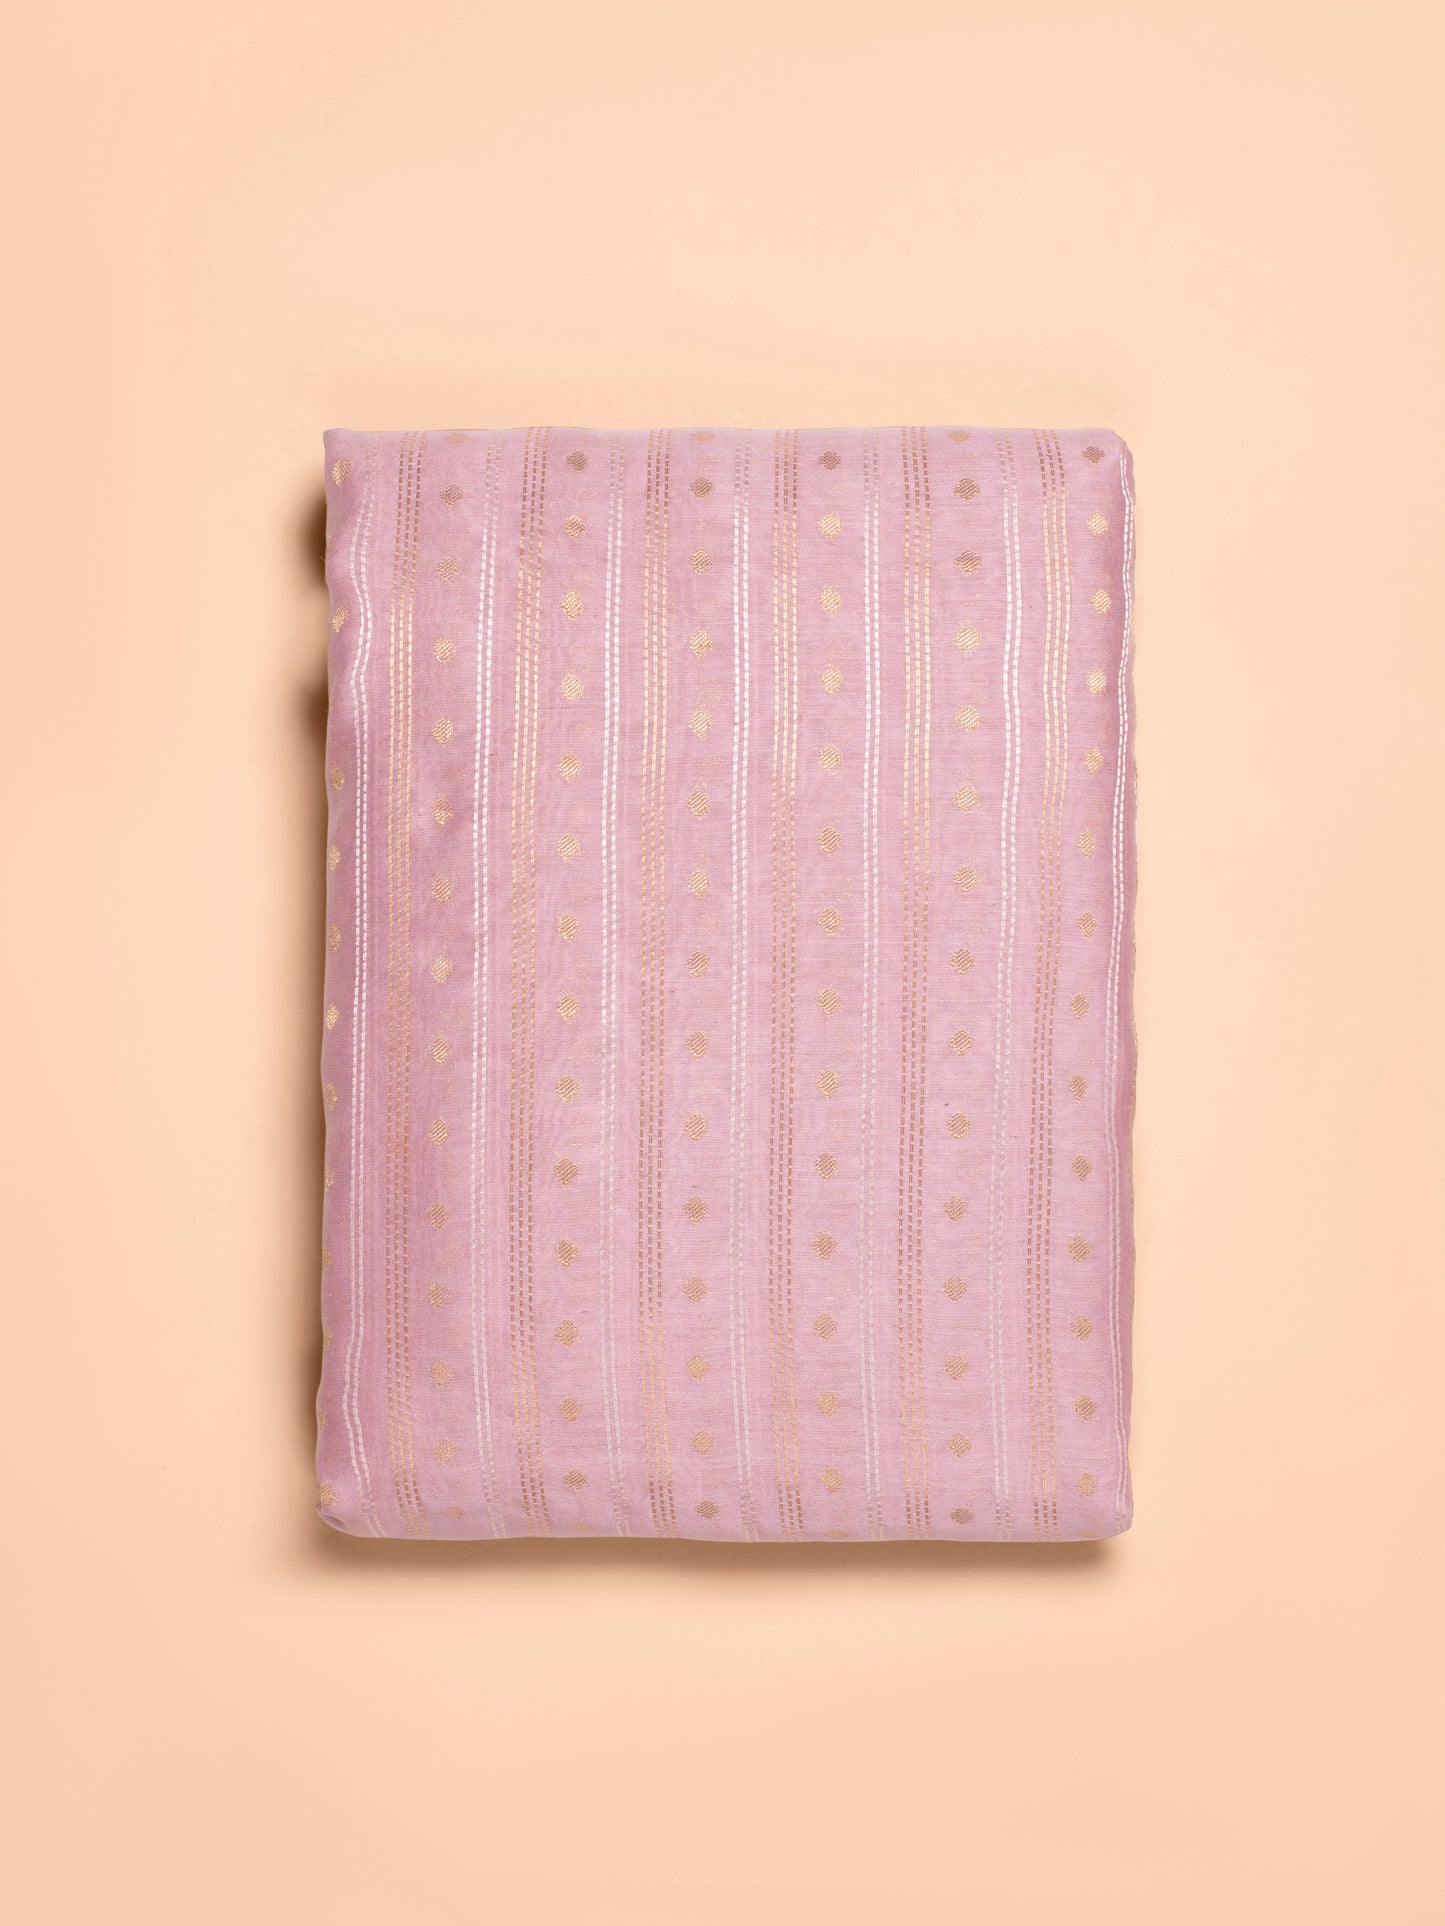 Handwoven Pink Cotton Fabric